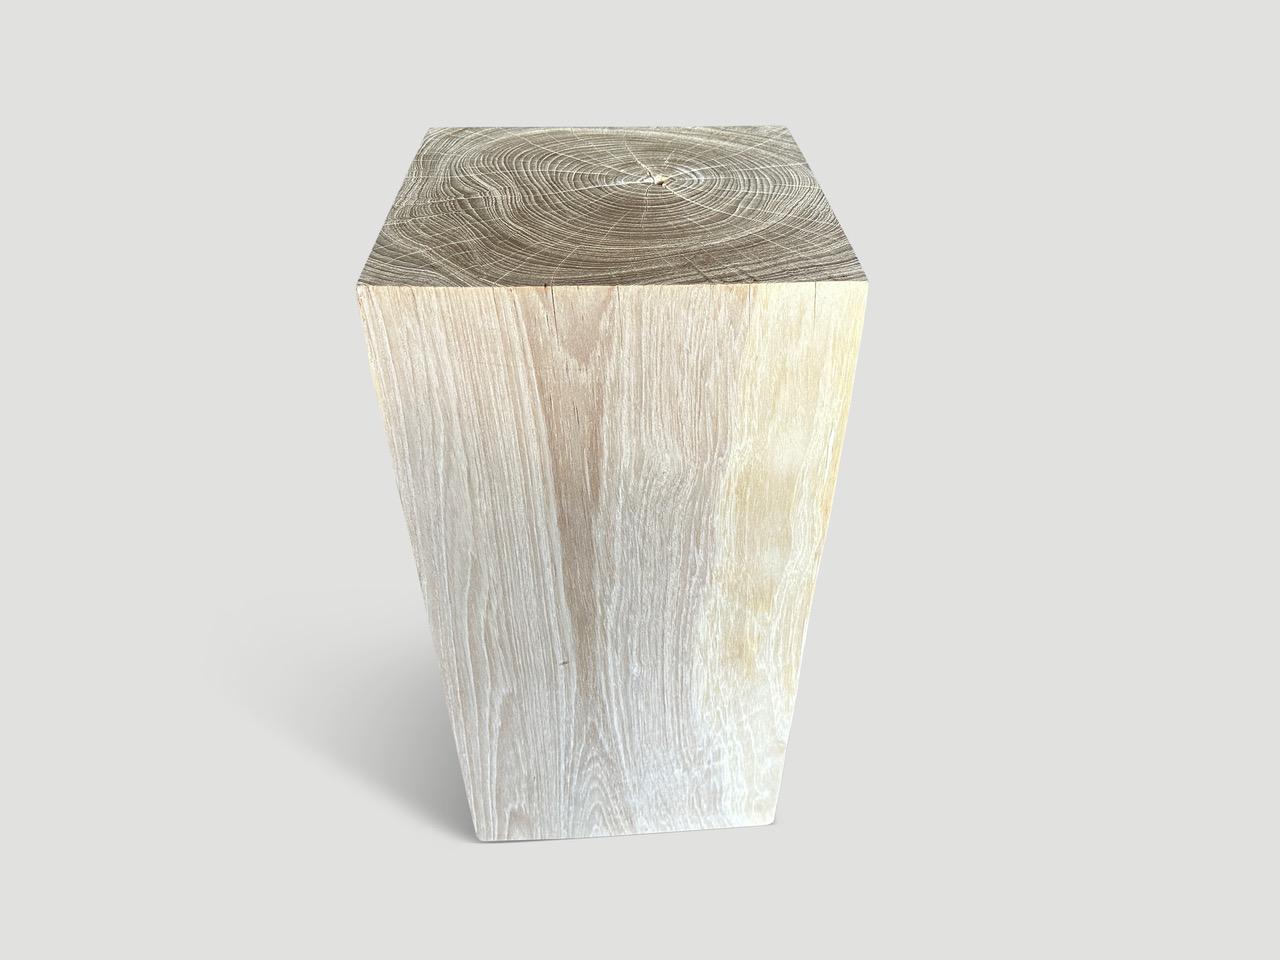 Reclaimed teak wood side table or pedestal hand carved whilst respecting the natural organic wood. Bleached to a bone finish revealing the beautiful wood grain. We have a collection of four. The price reflects one.

The St. Barts Collection features